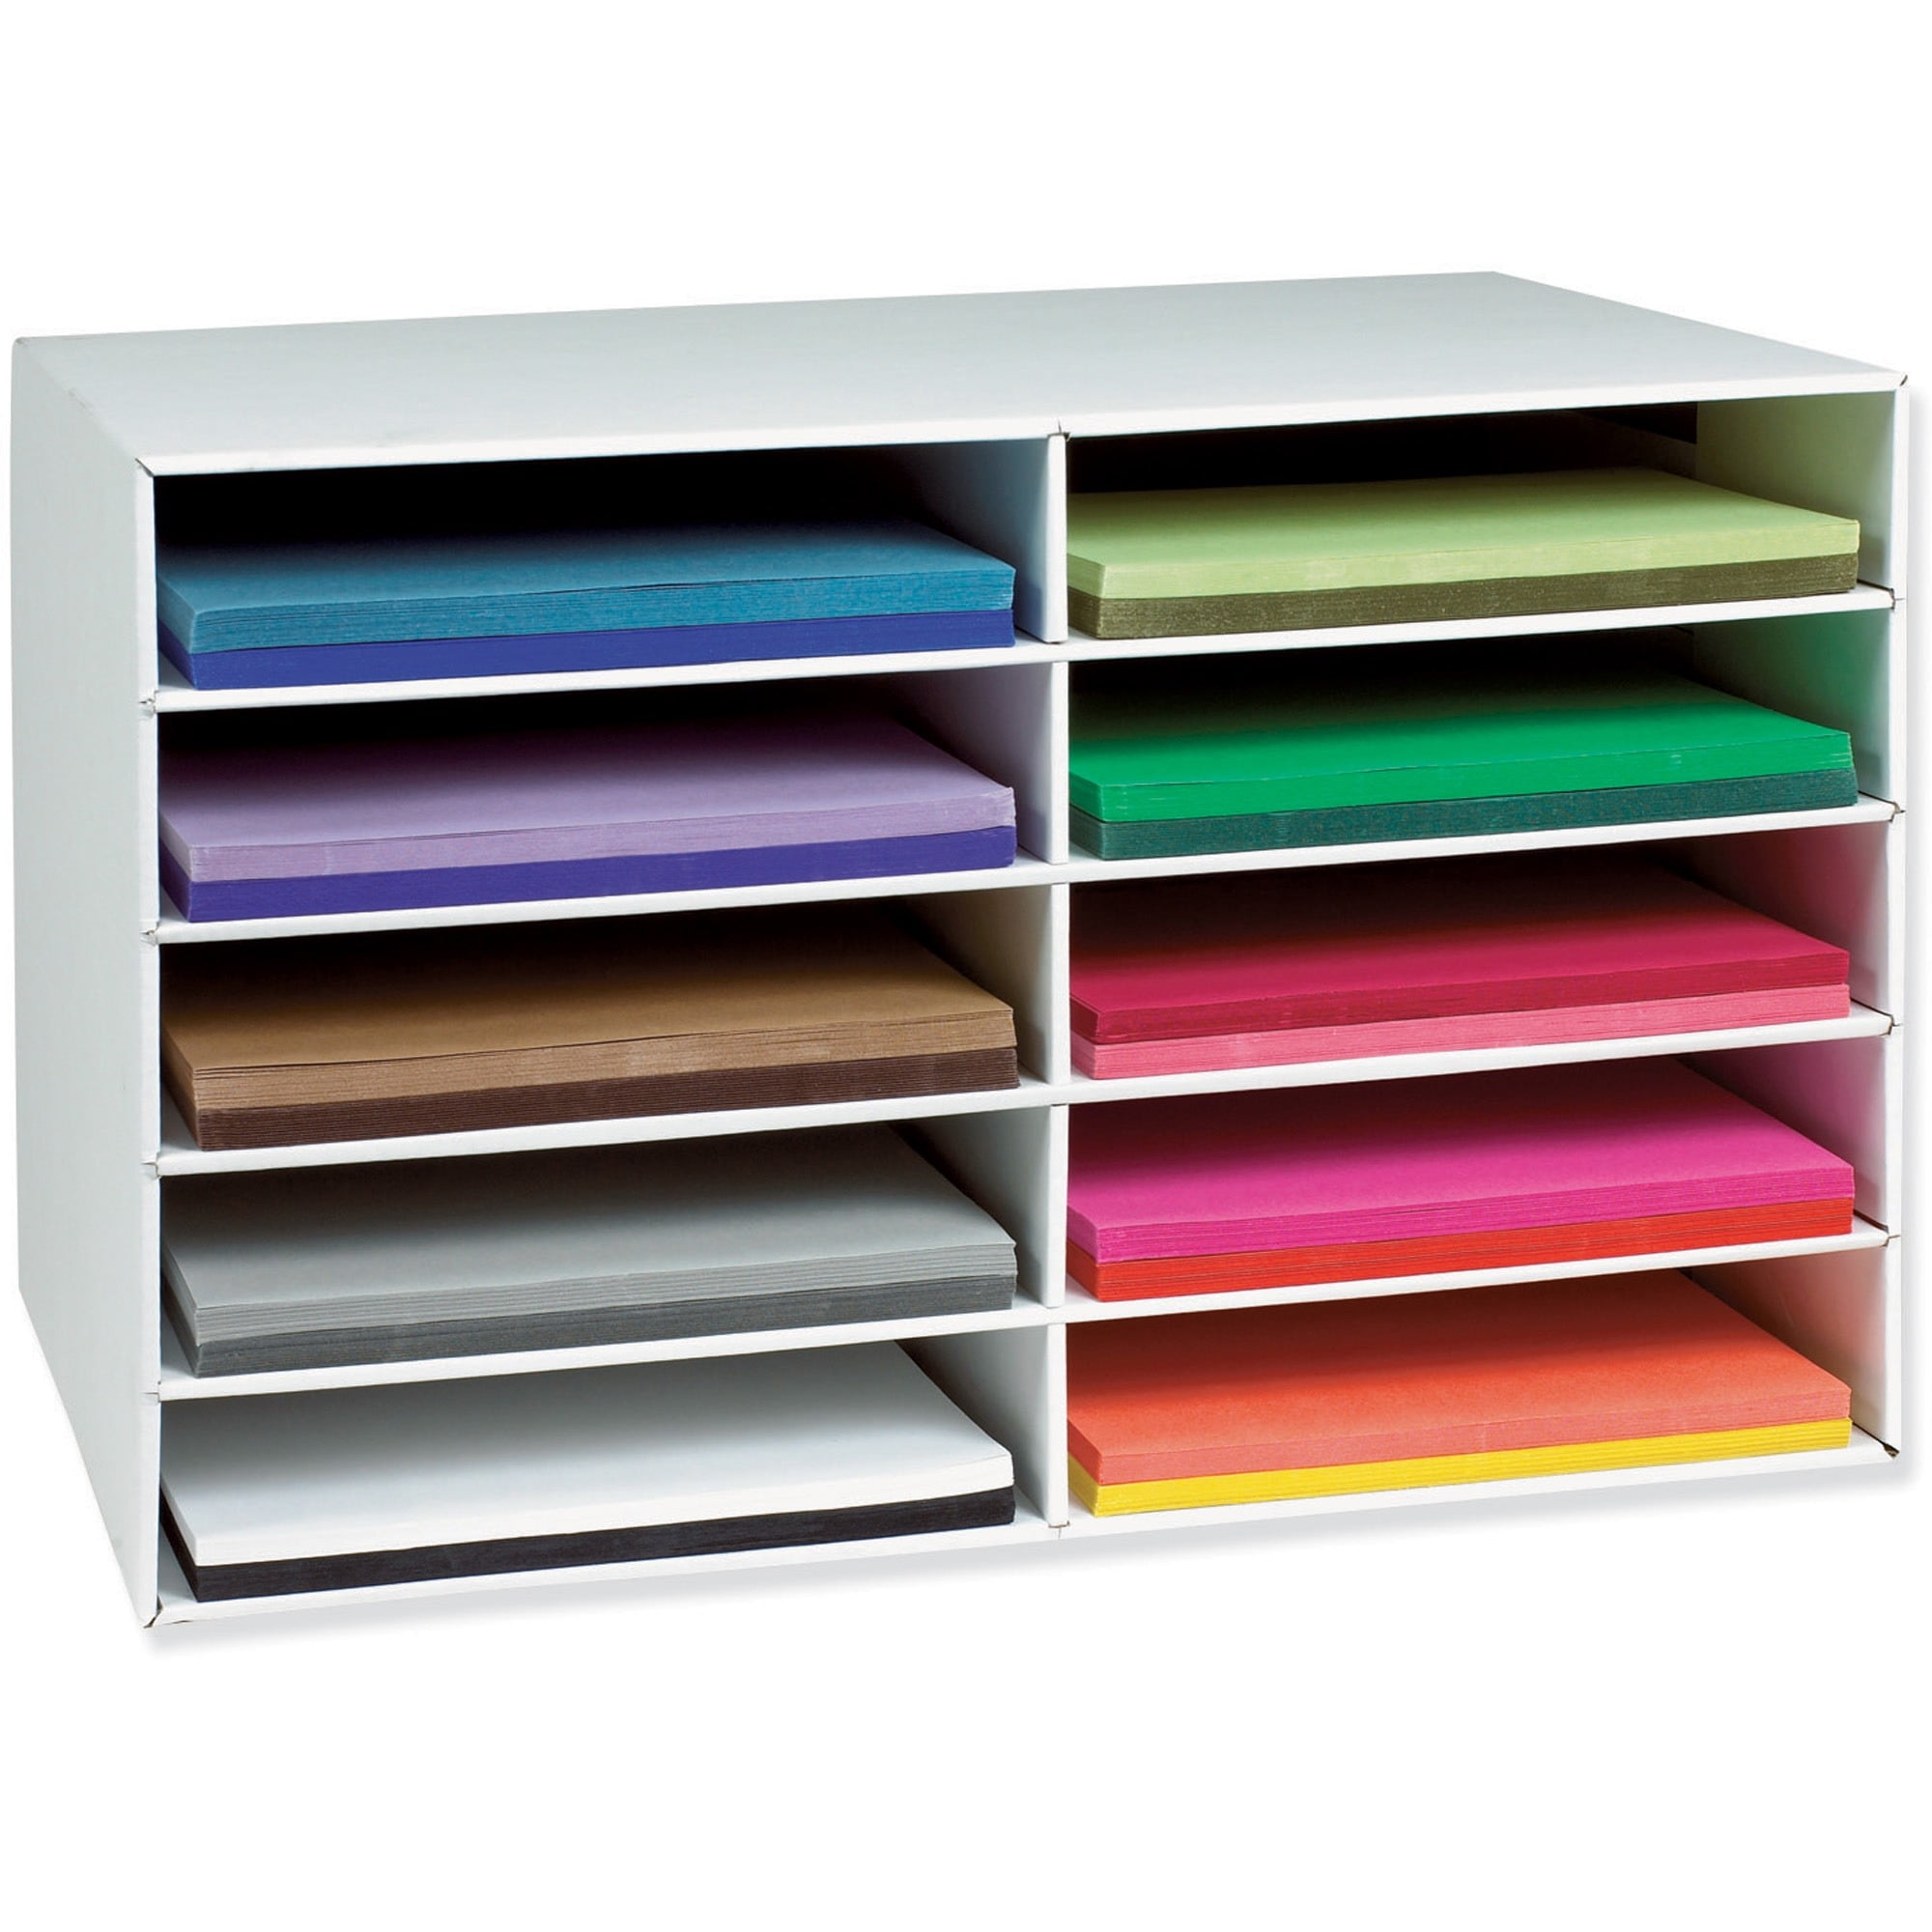 Classroom Keepers Construction Paper, White Shelving Paper